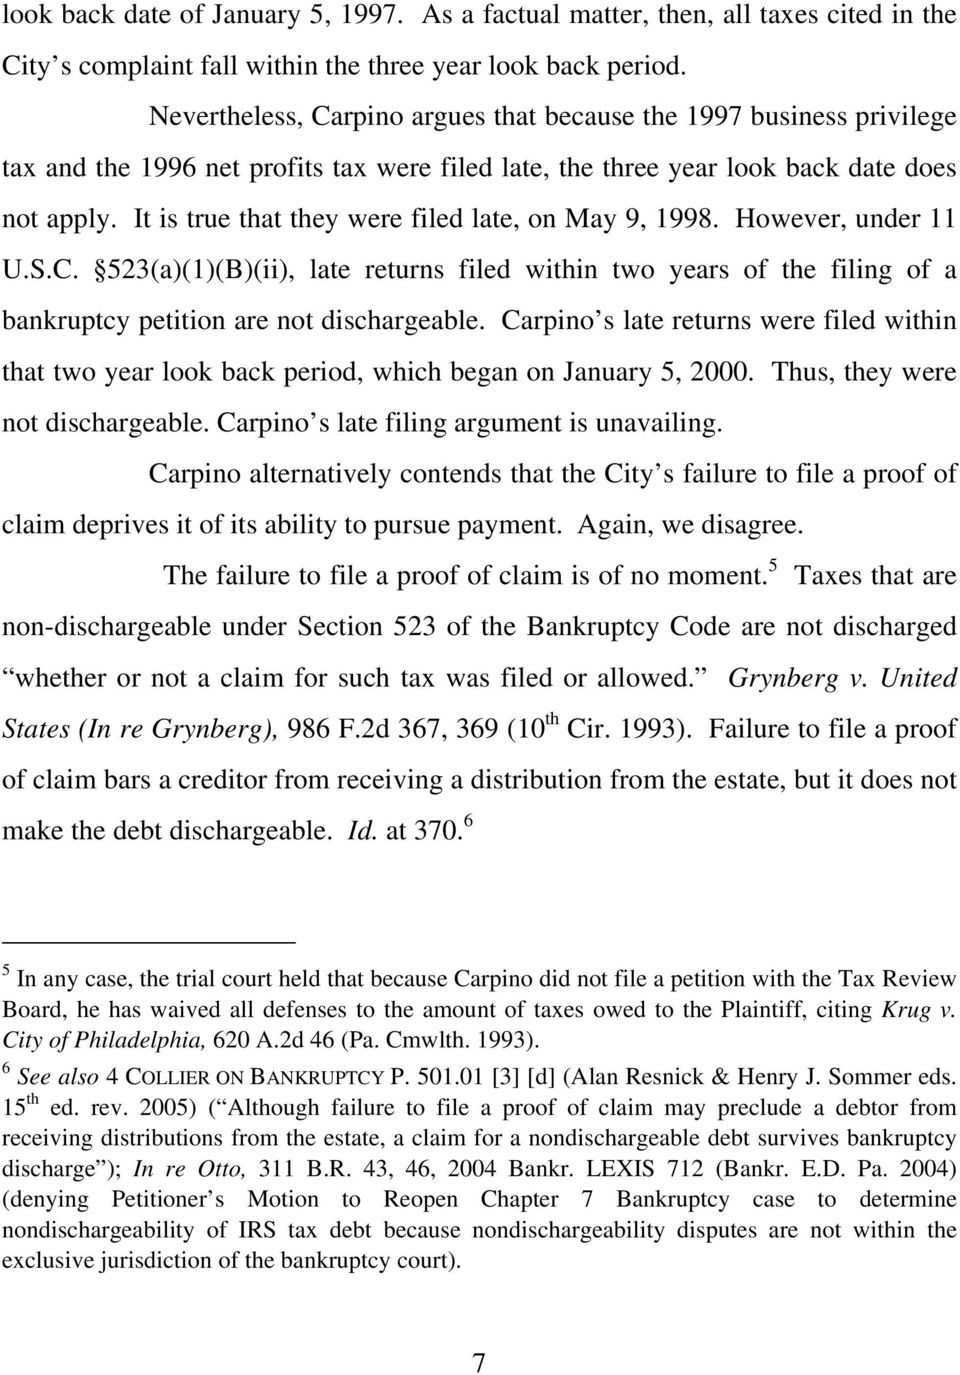 It is true that they were filed late, on May 9, 1998. However, under 11 U.S.C. 523(a)(1)(B)(ii), late returns filed within two years of the filing of a bankruptcy petition are not dischargeable.